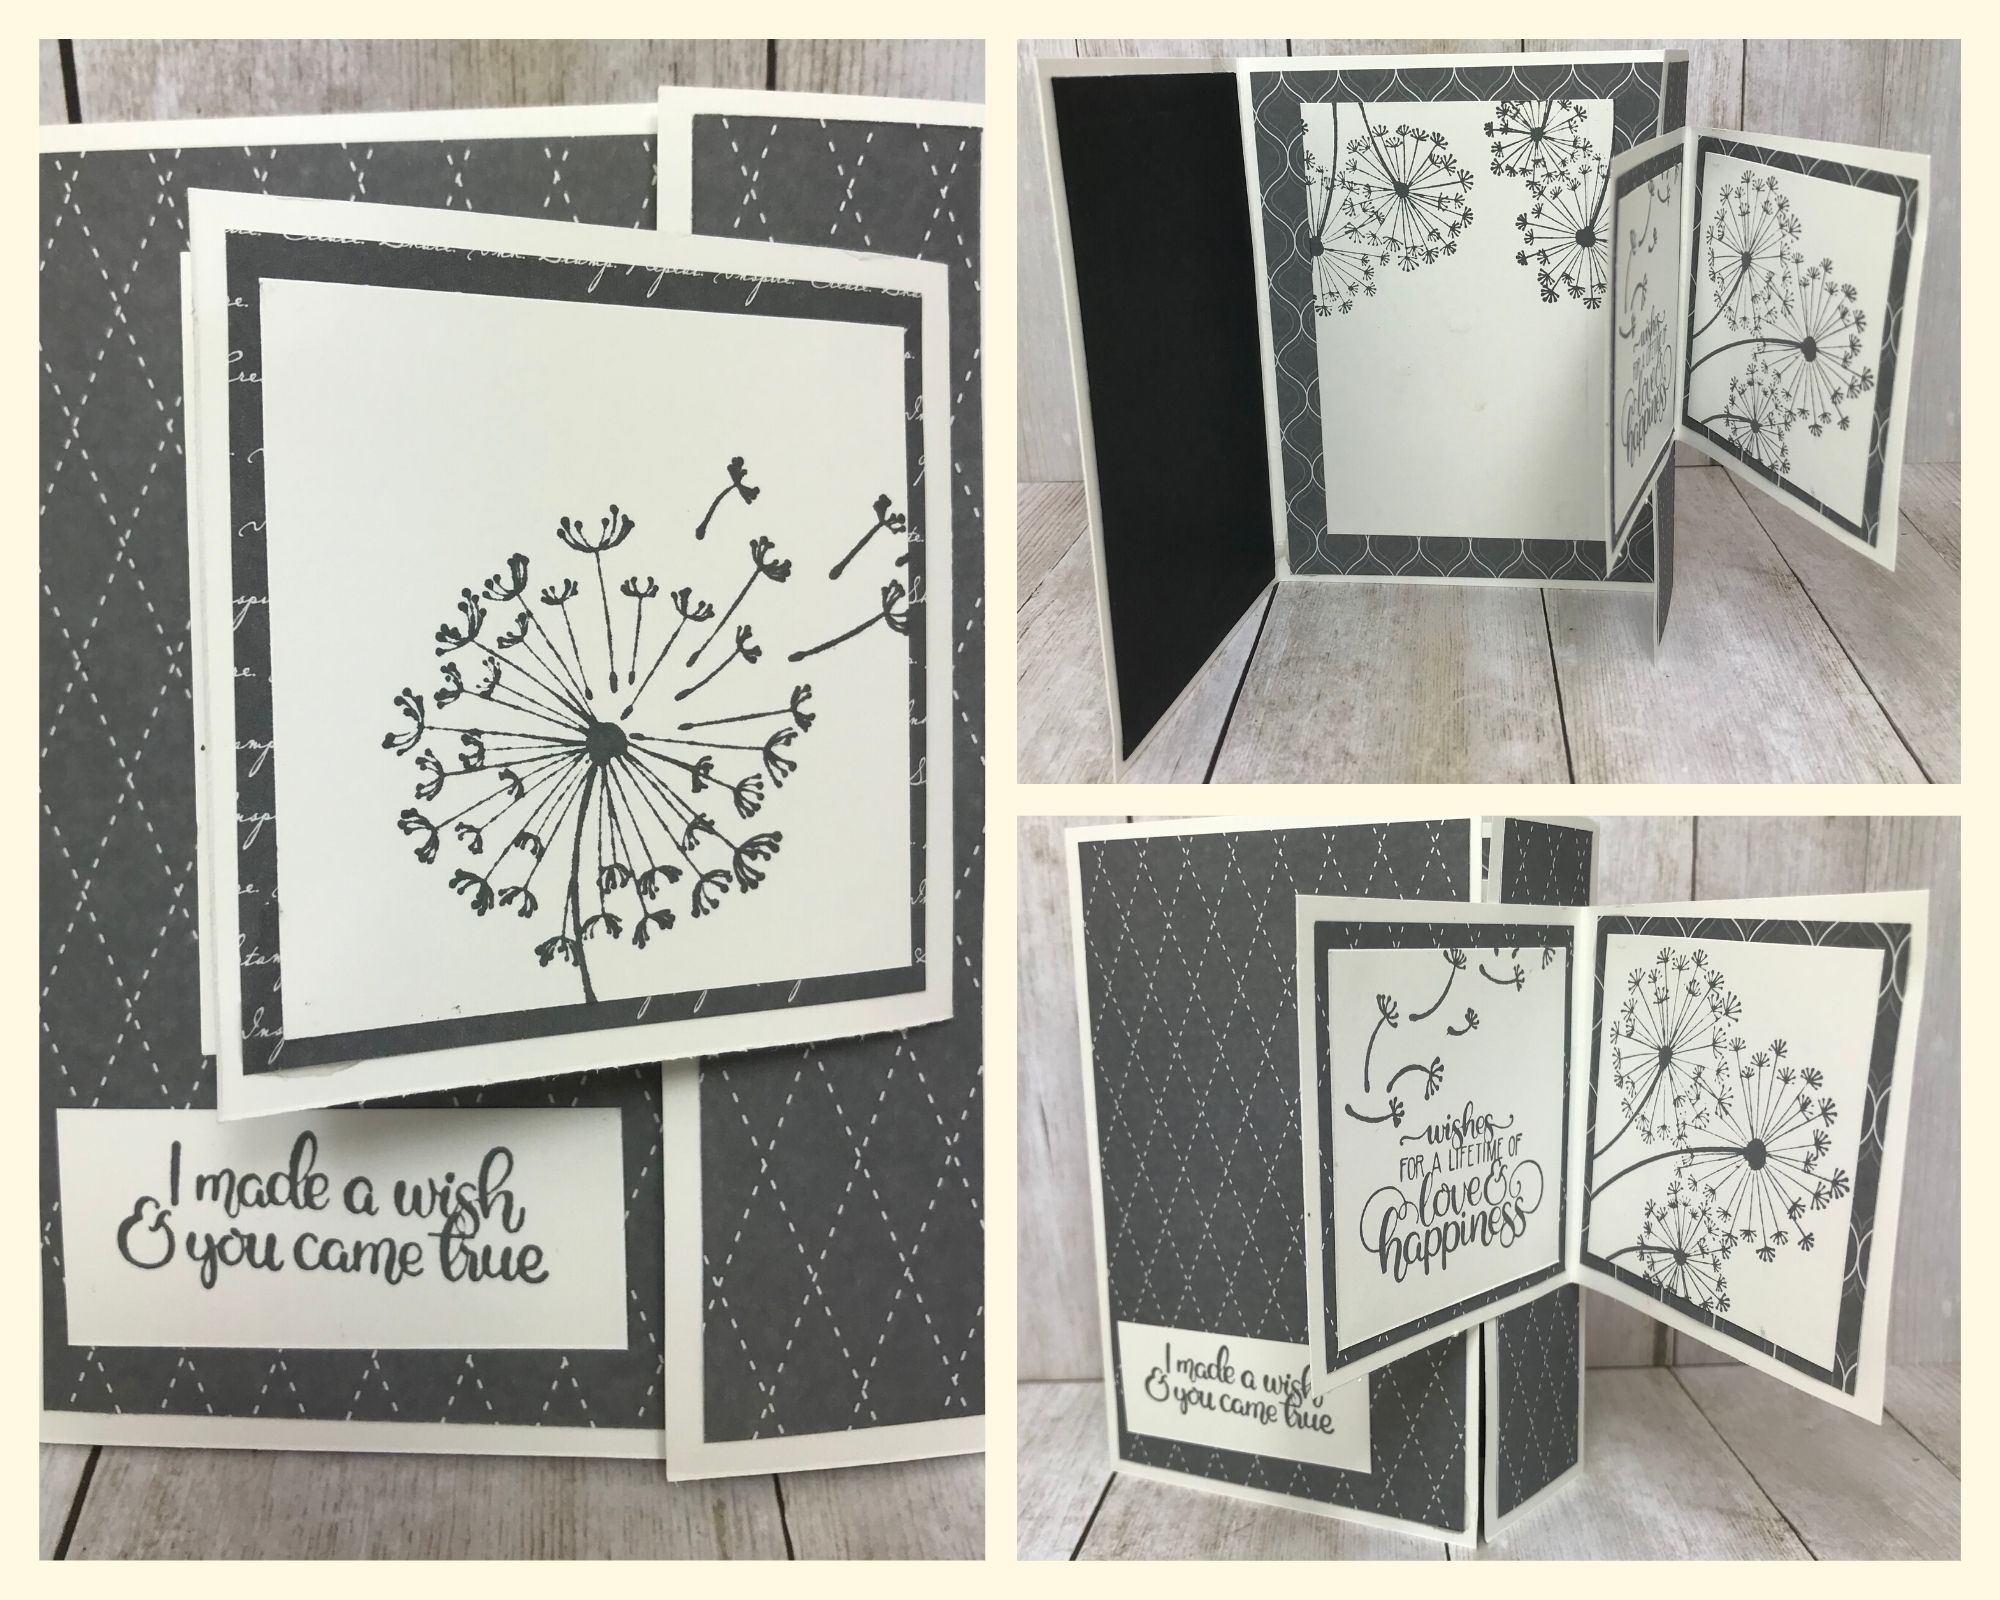 Dandelion Wishes Simple Stamping cards created by team mate Brenda Ubben. Details can be found on my blog here: https://wp.me/p59VWq-aZ8. #simplestamping #stampinup #thestampcamp